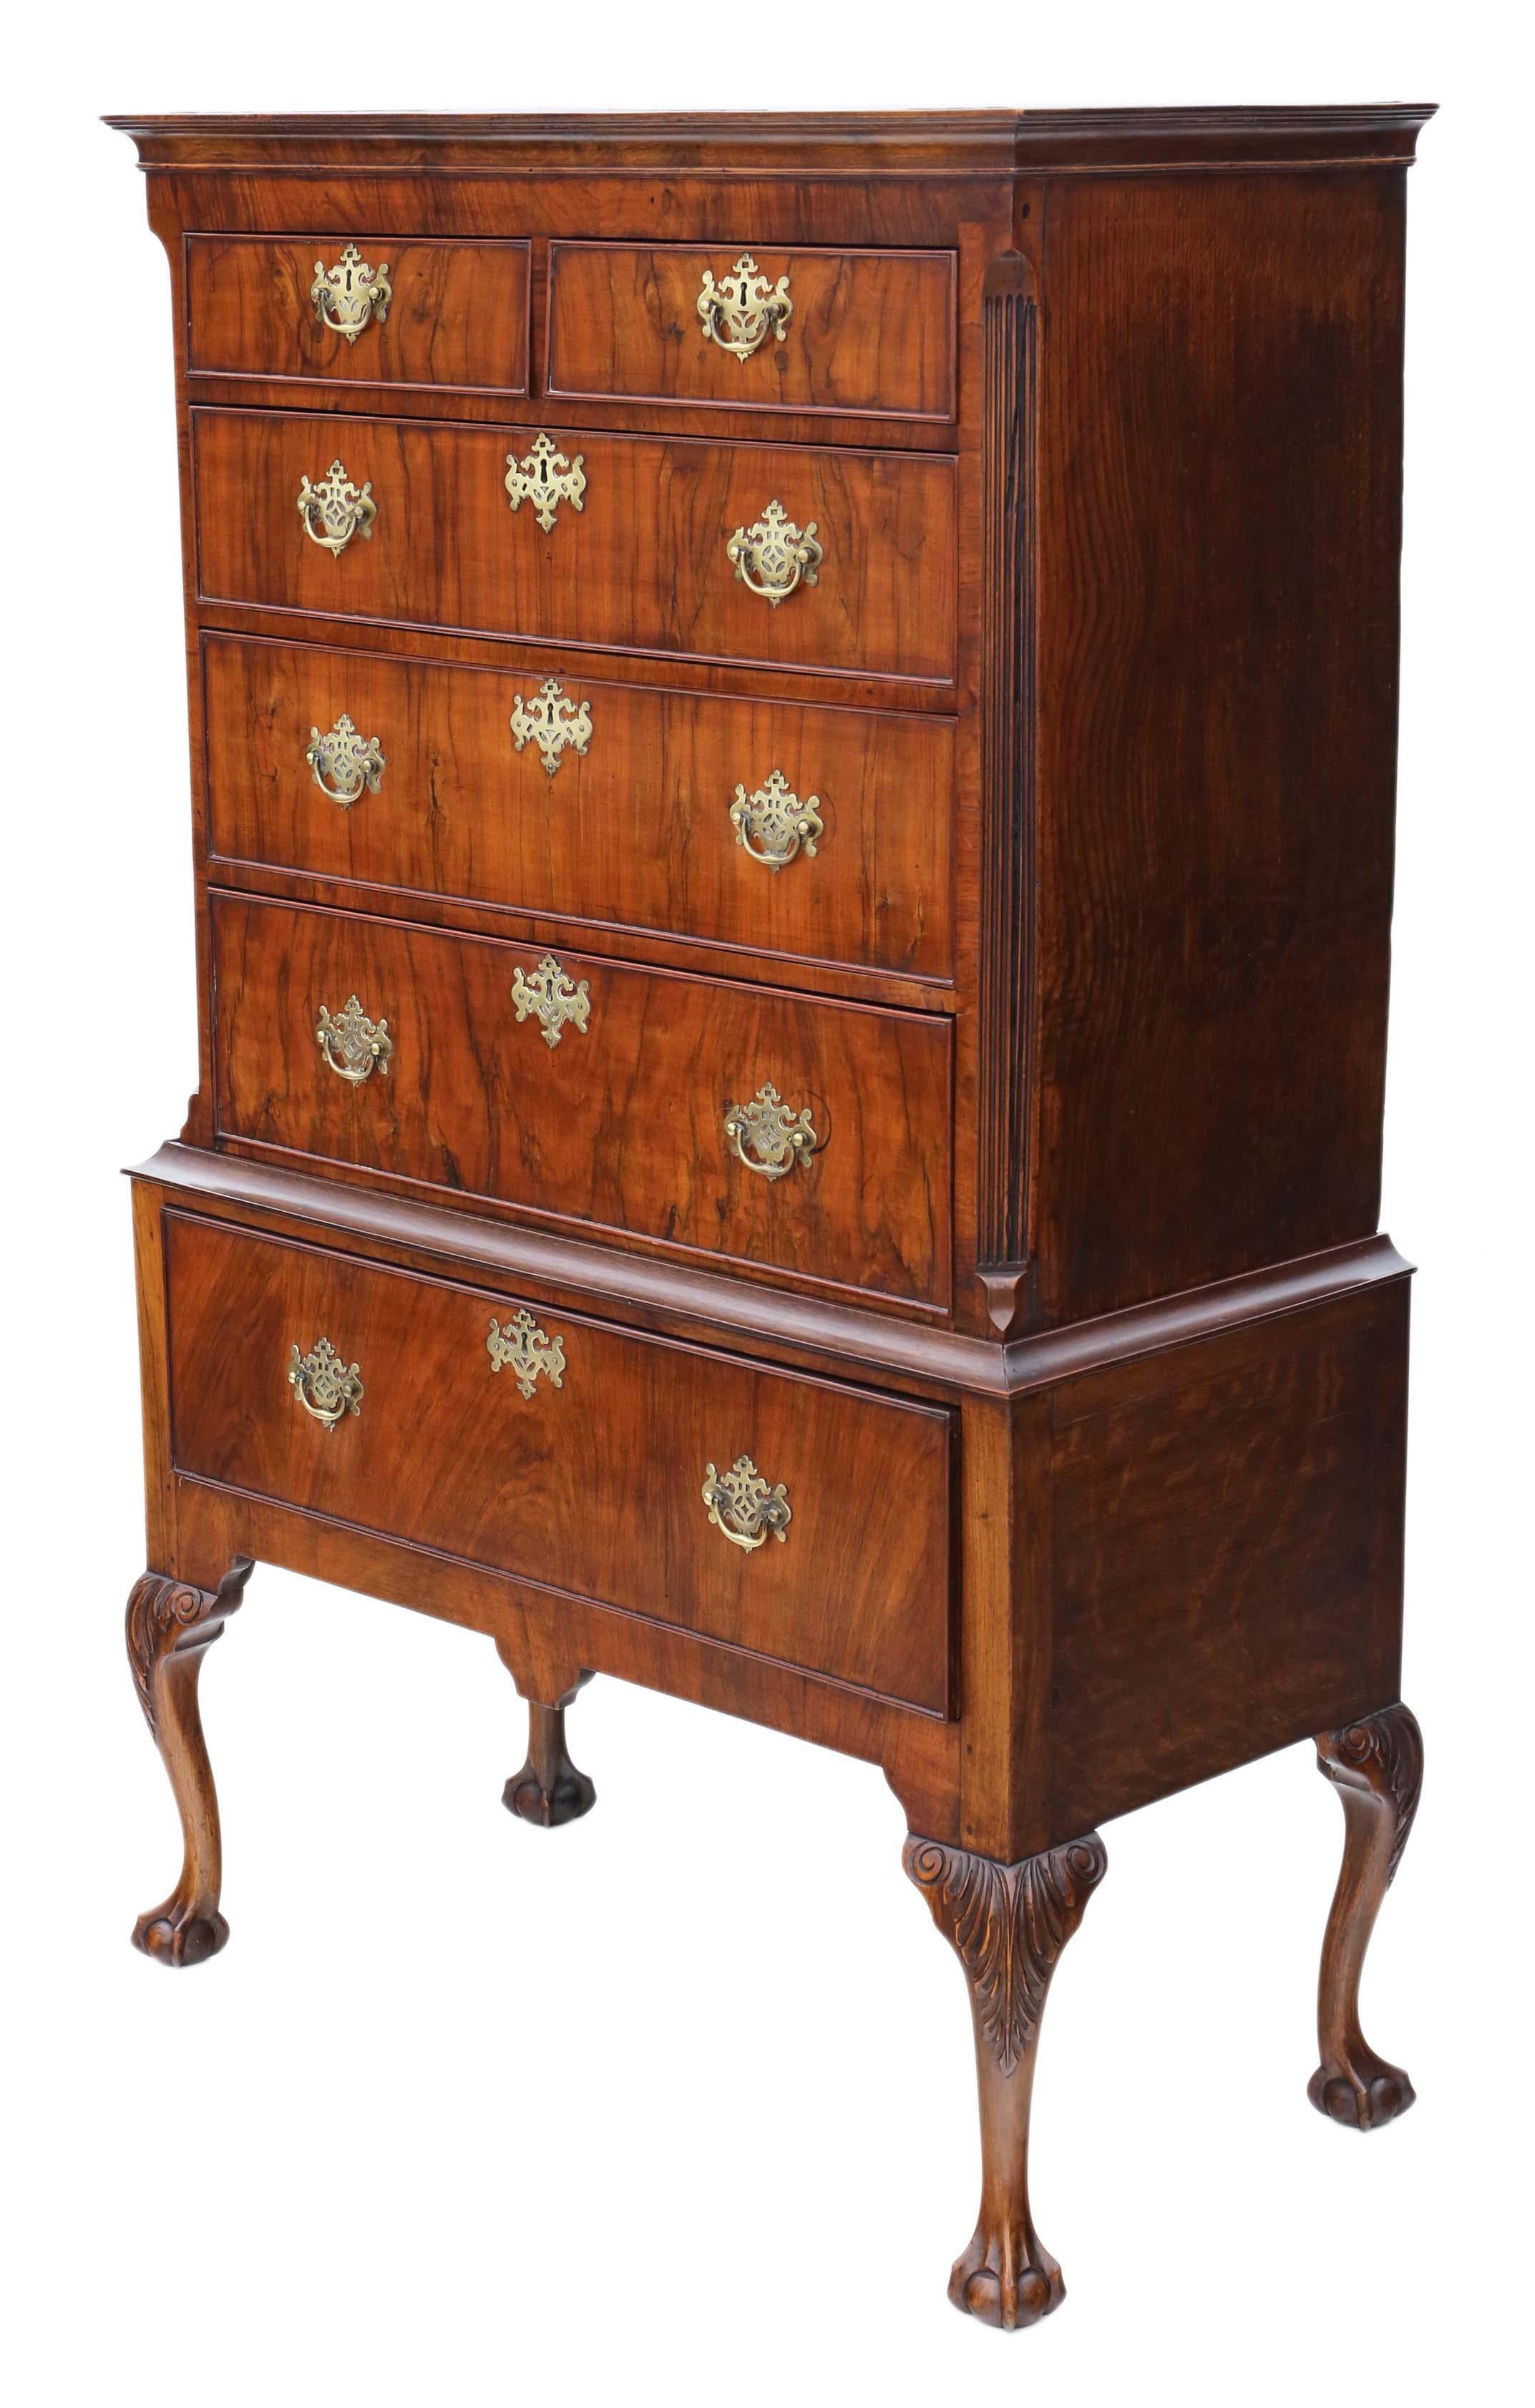 Antique Georgian Figured Walnut Chest of Drawers on Stand from the 18th Century For Sale 1